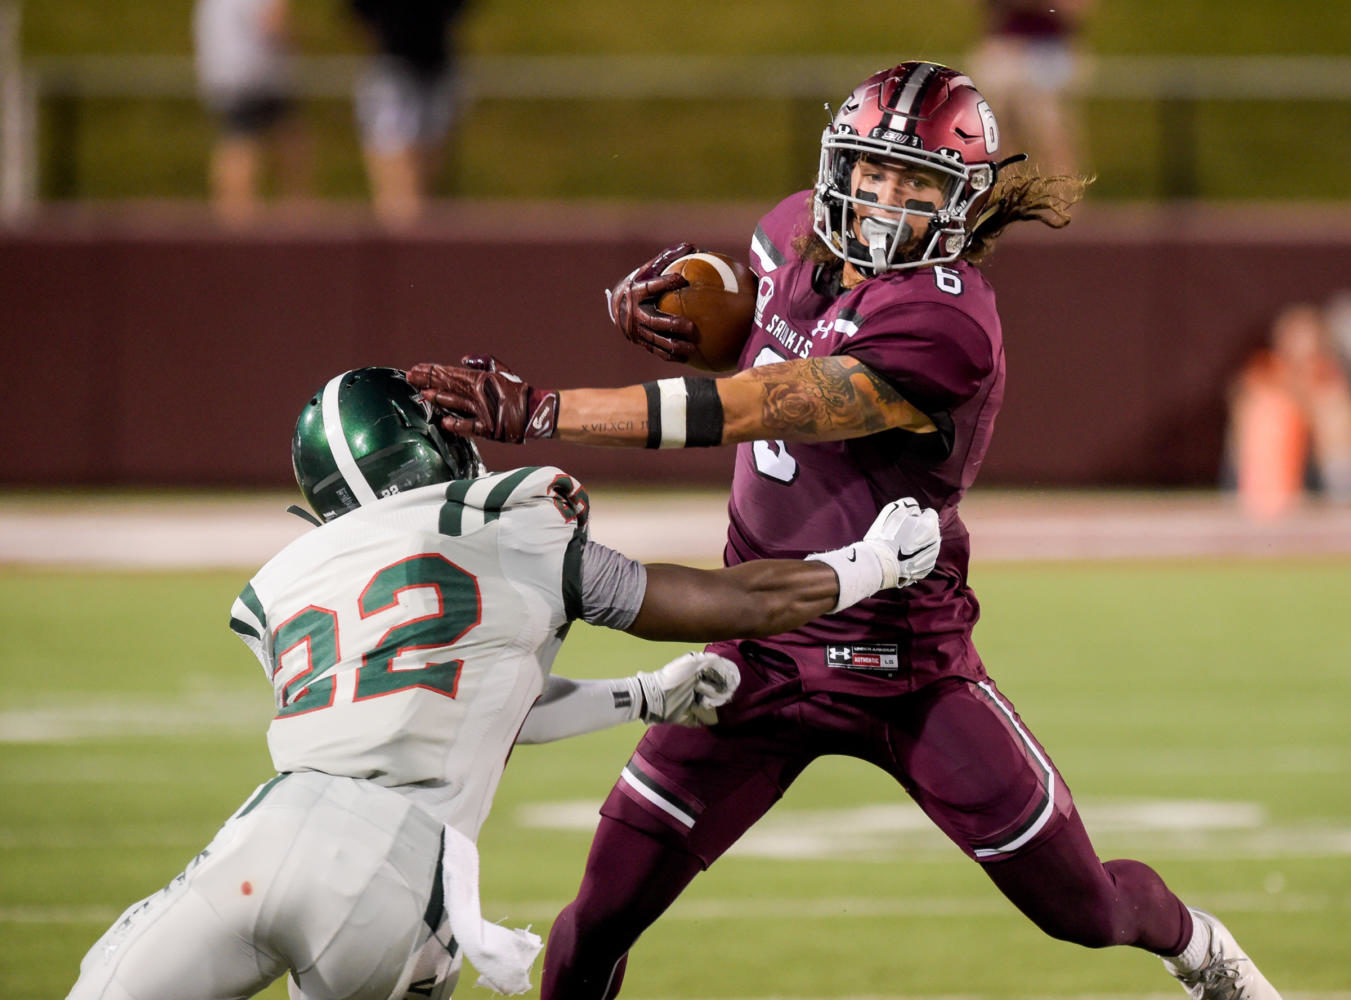 SIU senior wide receiver Connor Iwema (6) blocks Mississippi Valley's defensive back Adrian Campbell (22) during the second quarter of SIU’s home opener against the Mississippi Valley State Delta Devils Saturday, Sept. 9, 2017, at Saluki Stadium.  (Brian Muñoz | @BrianMMunoz)